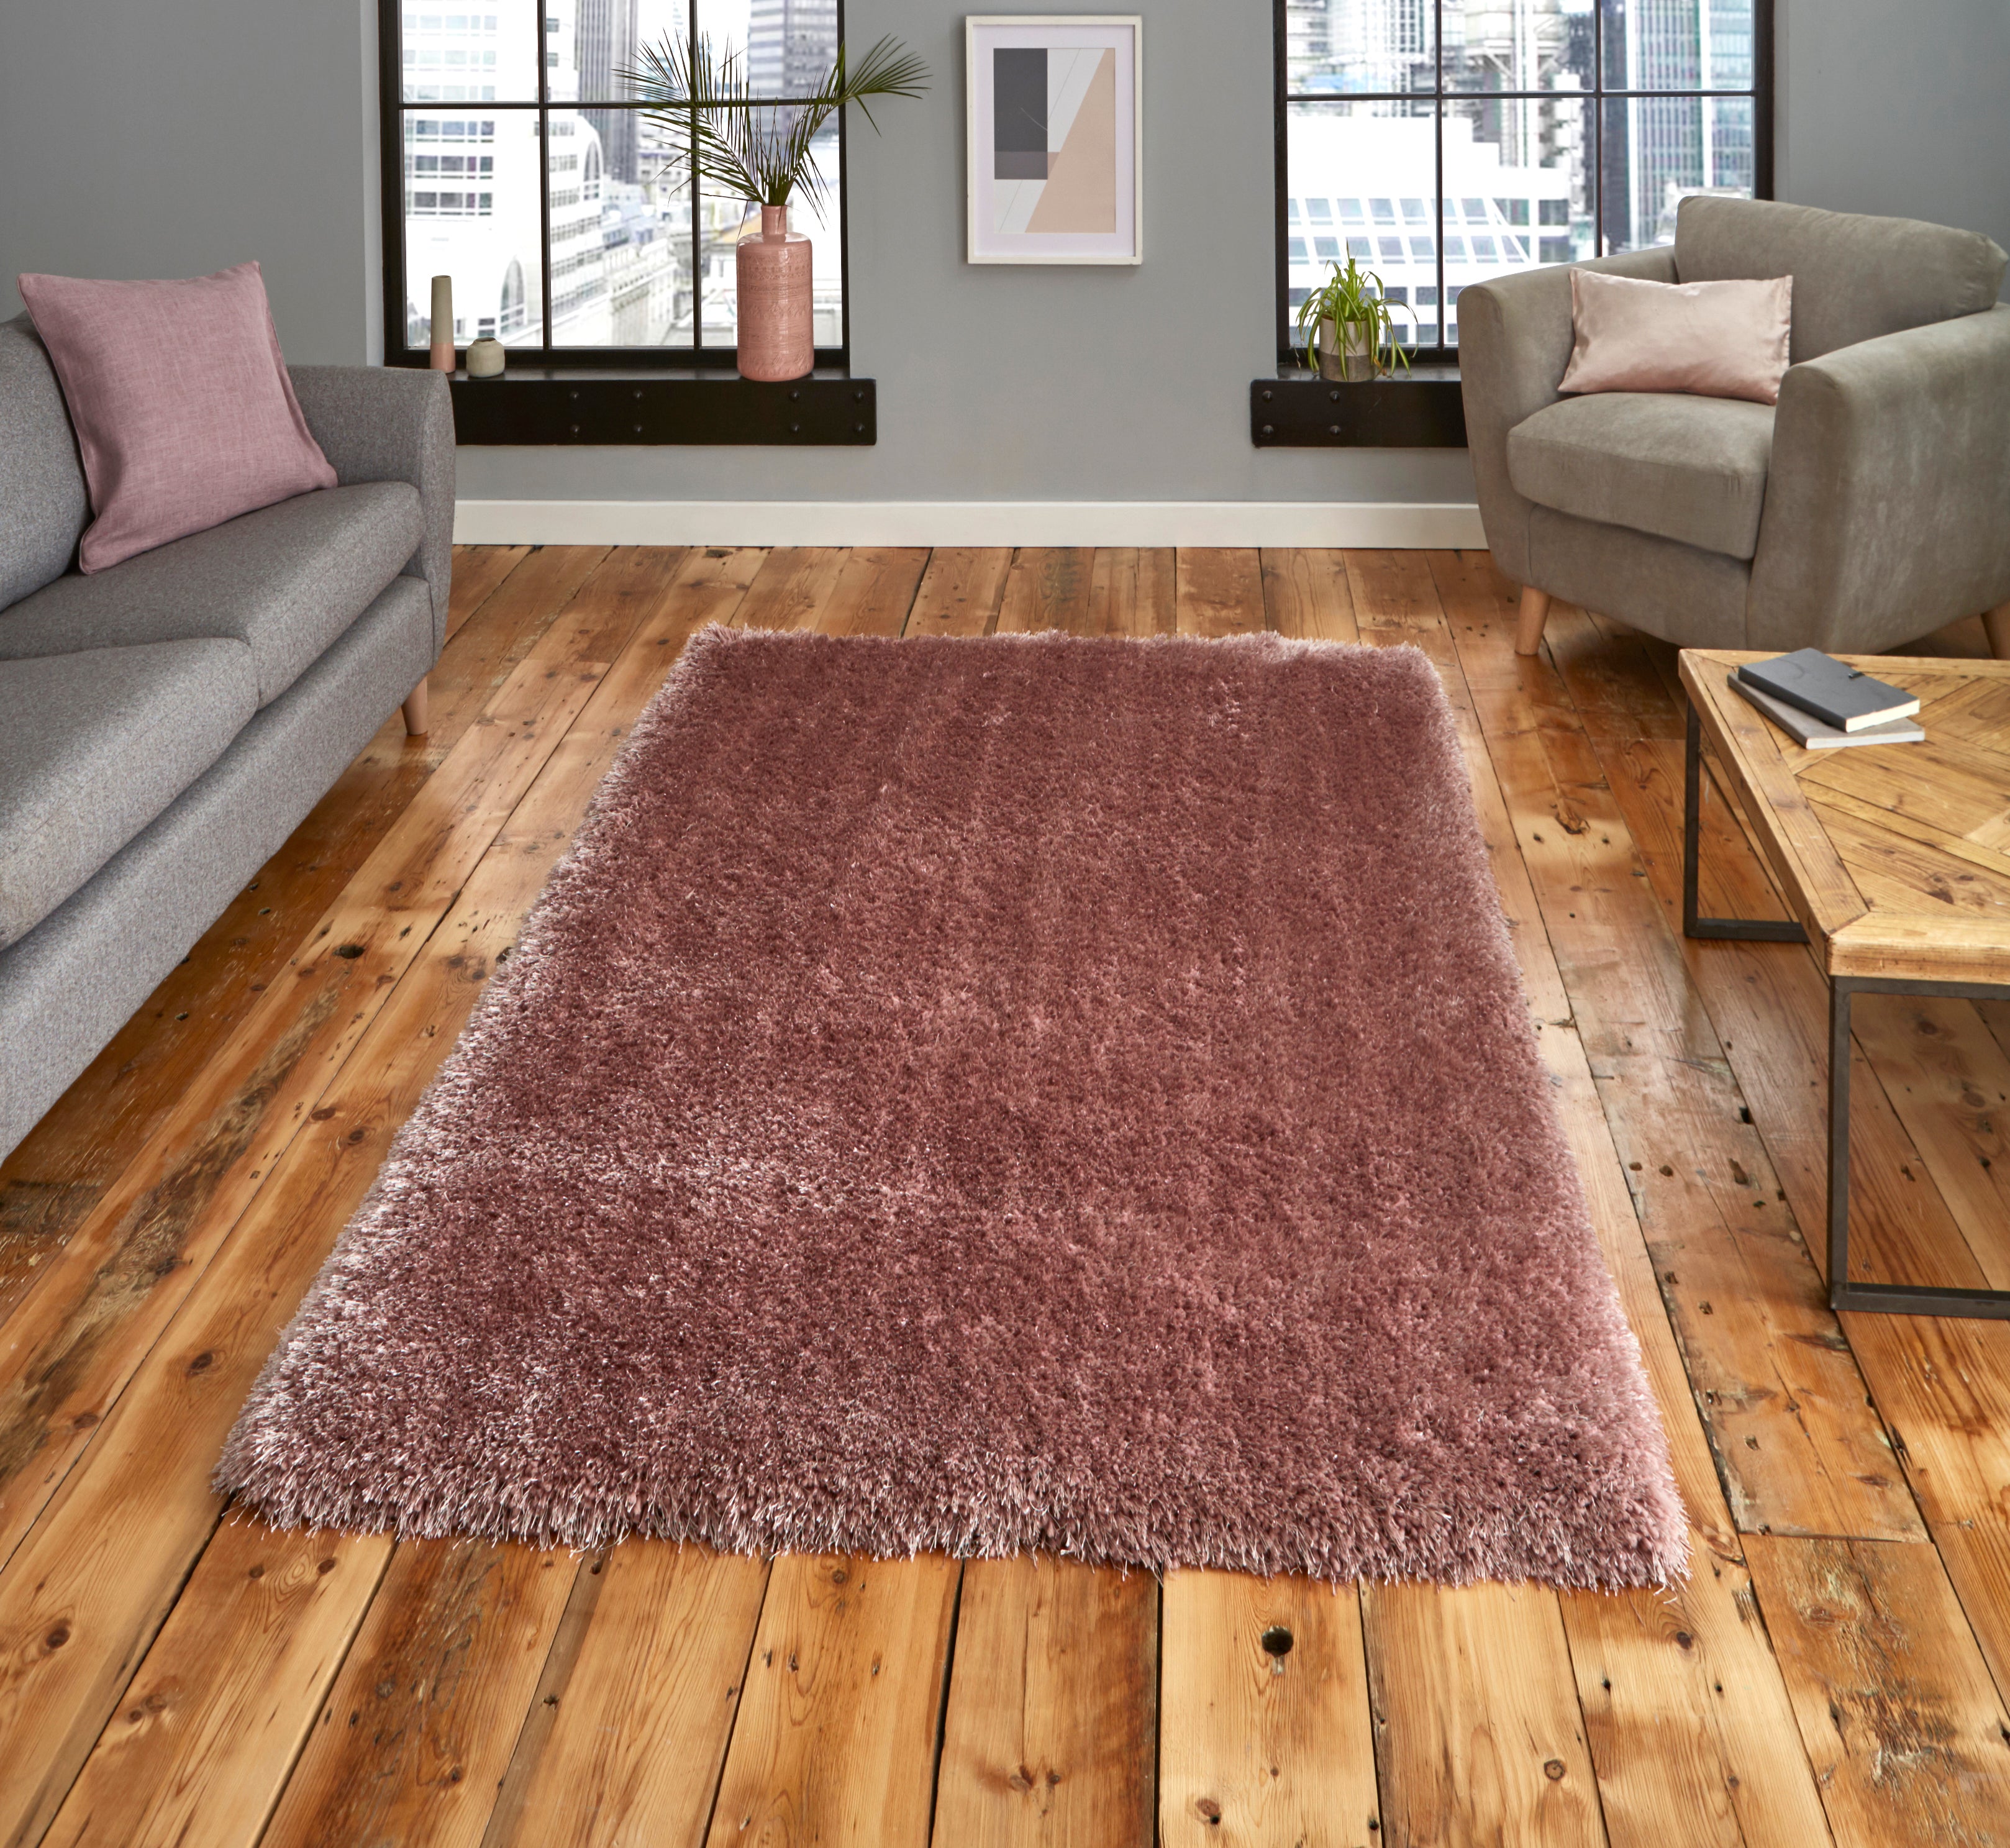 An image of Montana Colourful shaggy Modern Rugs 120 x 170cm / Rose